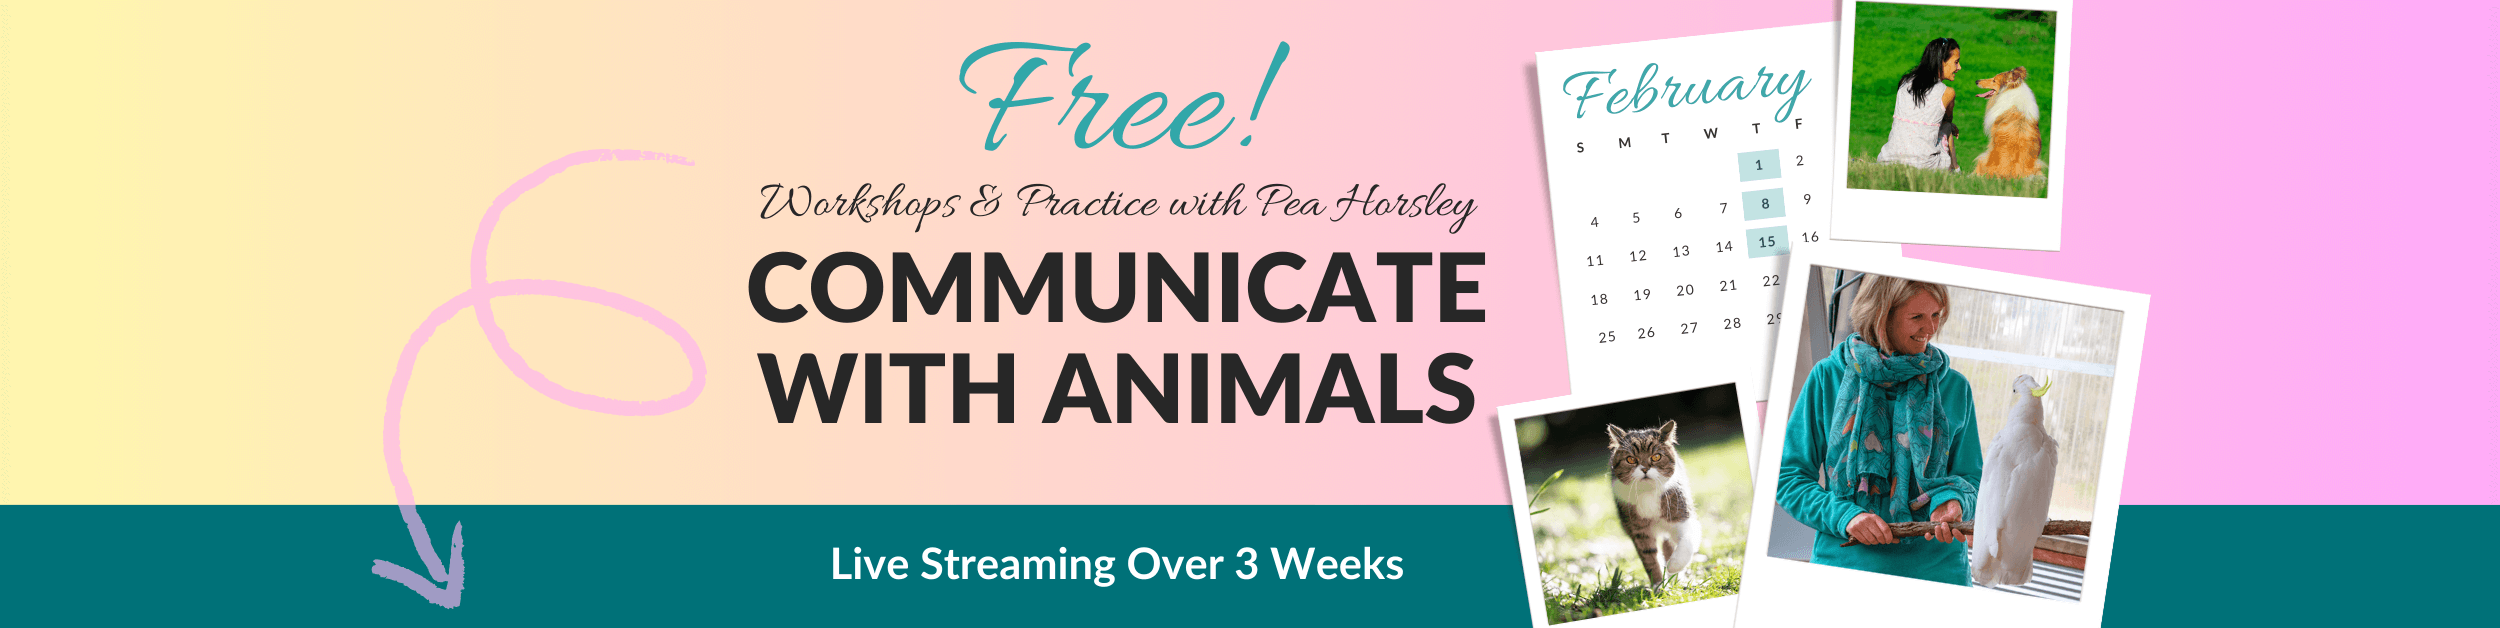 Communicate with Animals Free workshop & practice with Pea Hosley. Live streaming over 3 weeks in February